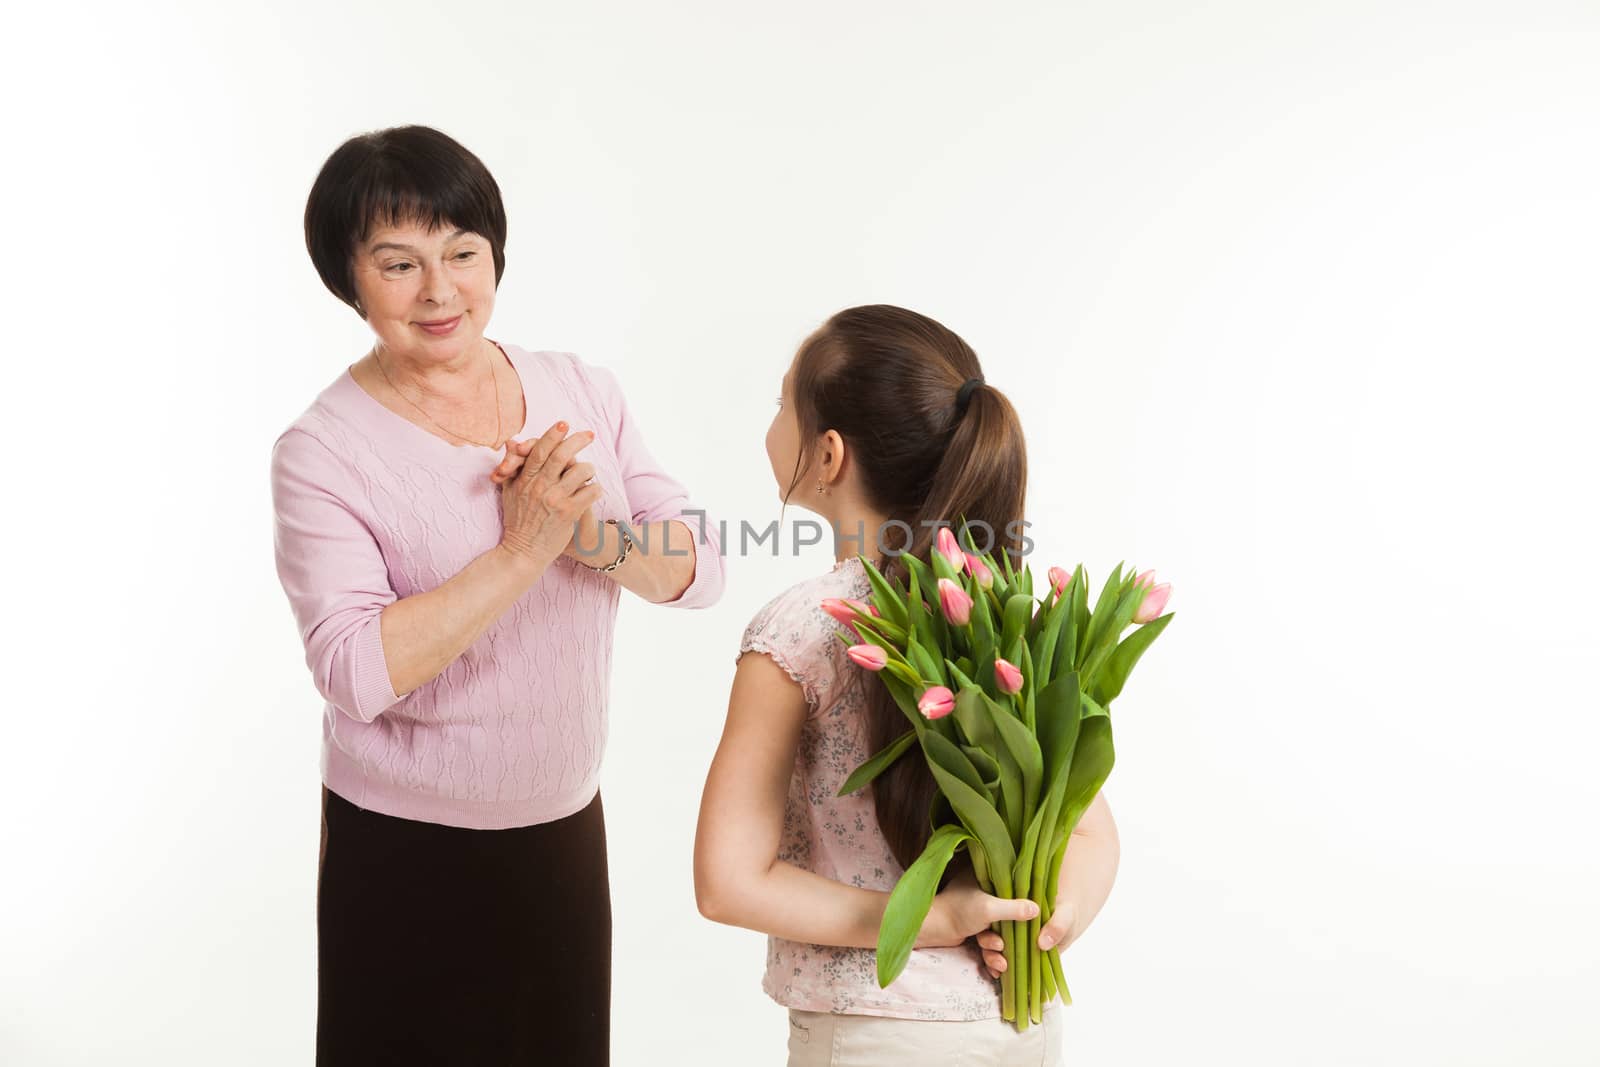 the granddaughter hides a bouquet of flowers for the grandmother by sveter